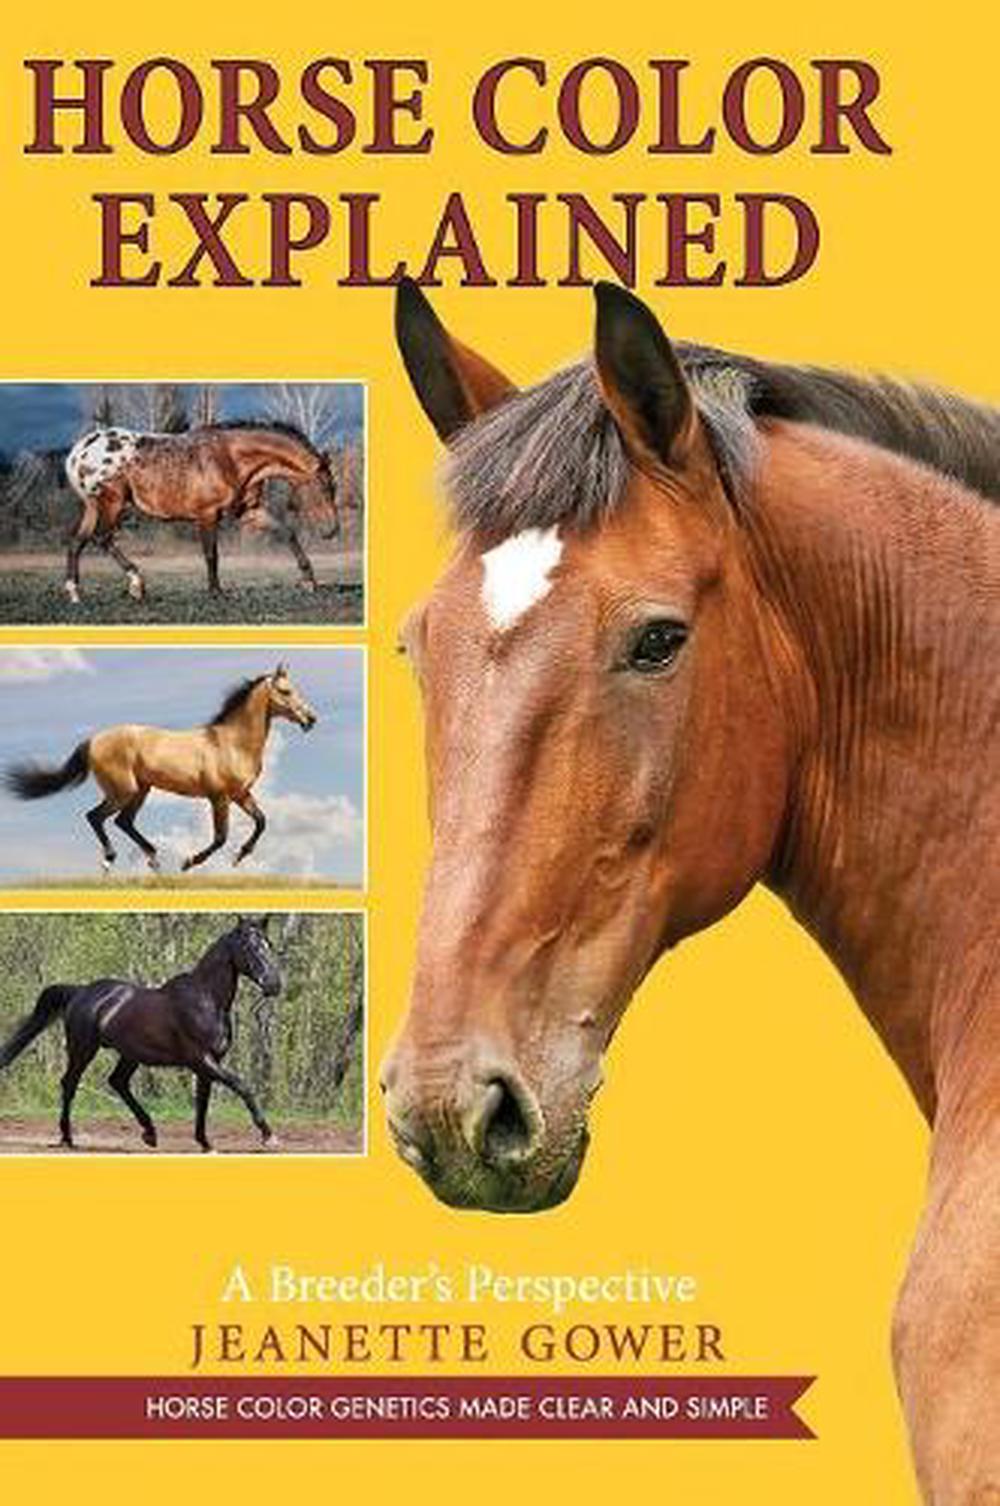 Horse Color Explained: A Breeder's Perspective by Jeanette Gower Hardcover Book  - Photo 1/1